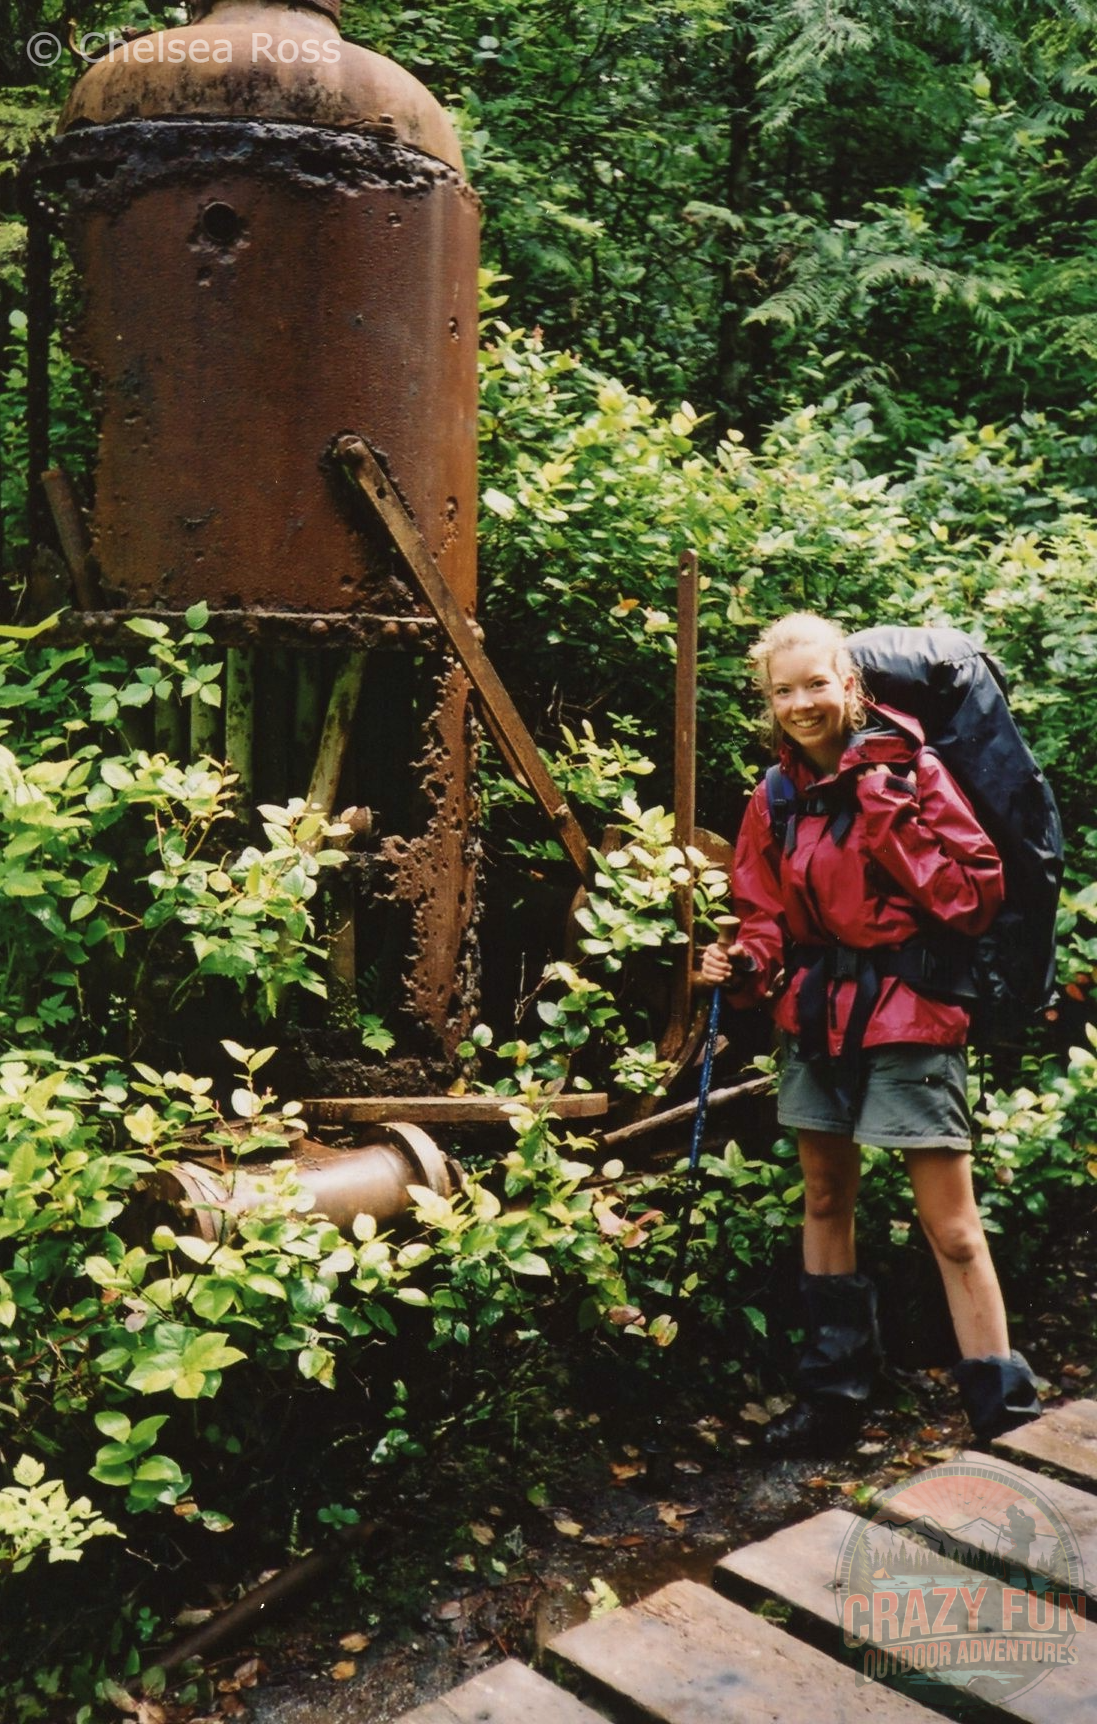 West Coast Trail tips: look for an old Donkey in the forest. Here a girl is standing beside it.